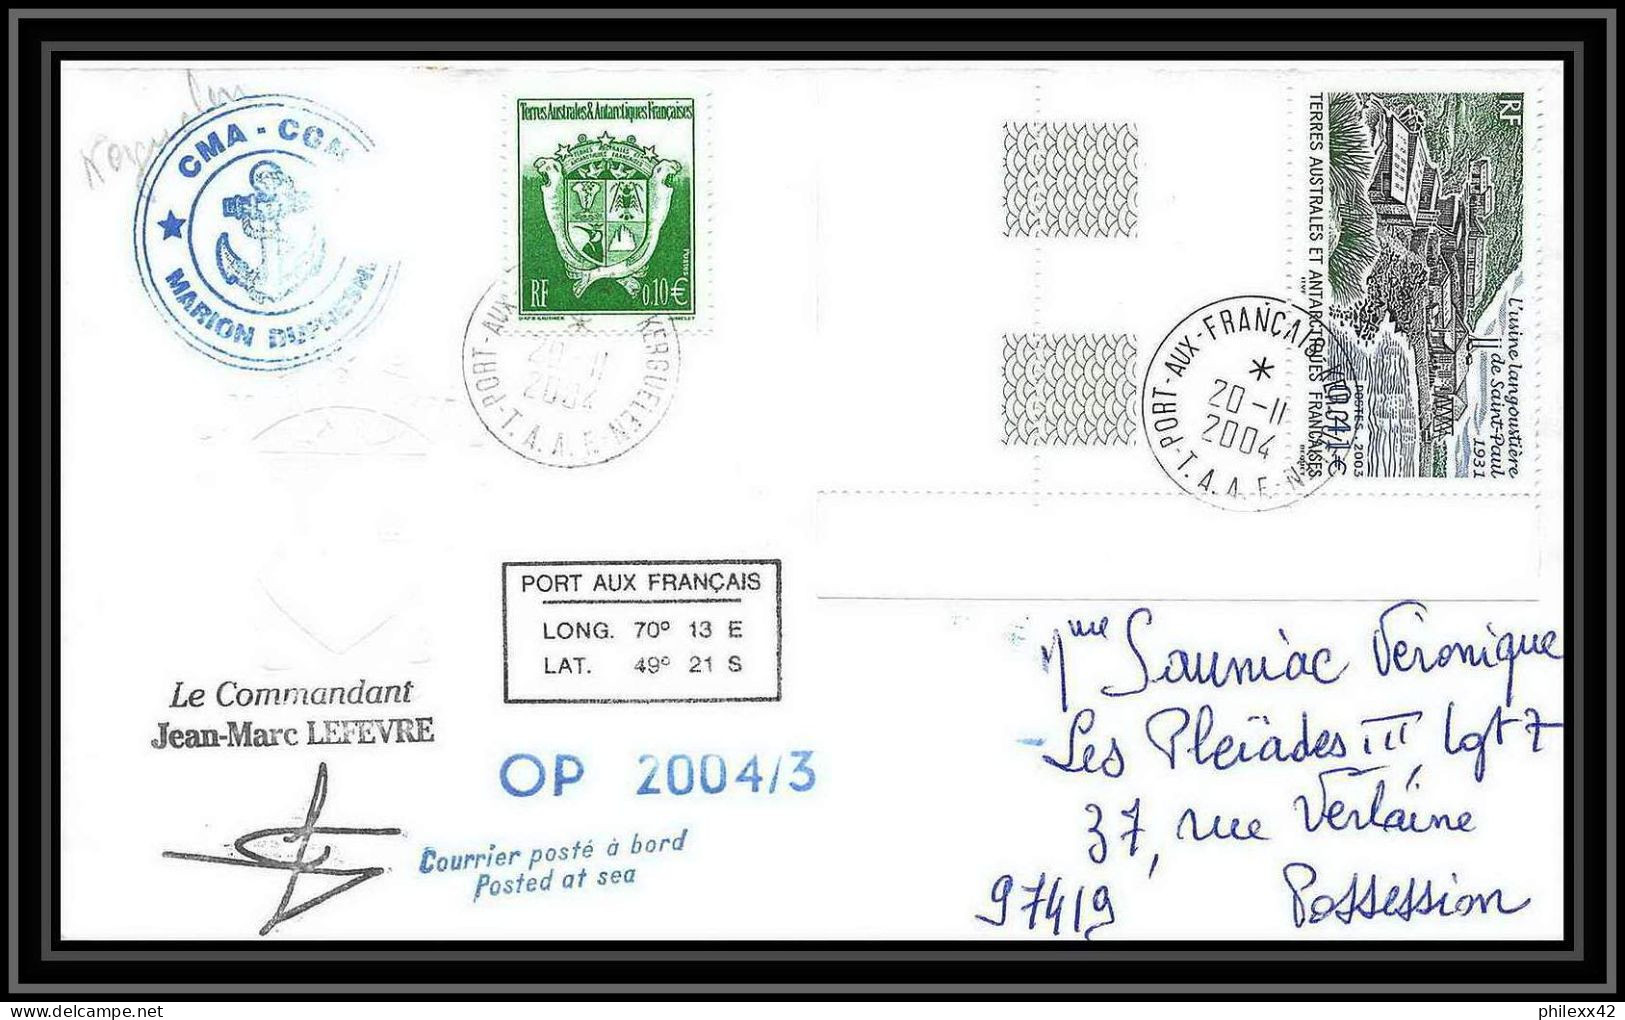 2472 ANTARCTIC Terres Australes TAAF Lettre Cover Dufresne 2 Signé Signed OP 2004/3 20/11/2004 N°349 Helilagon - Hélicoptères